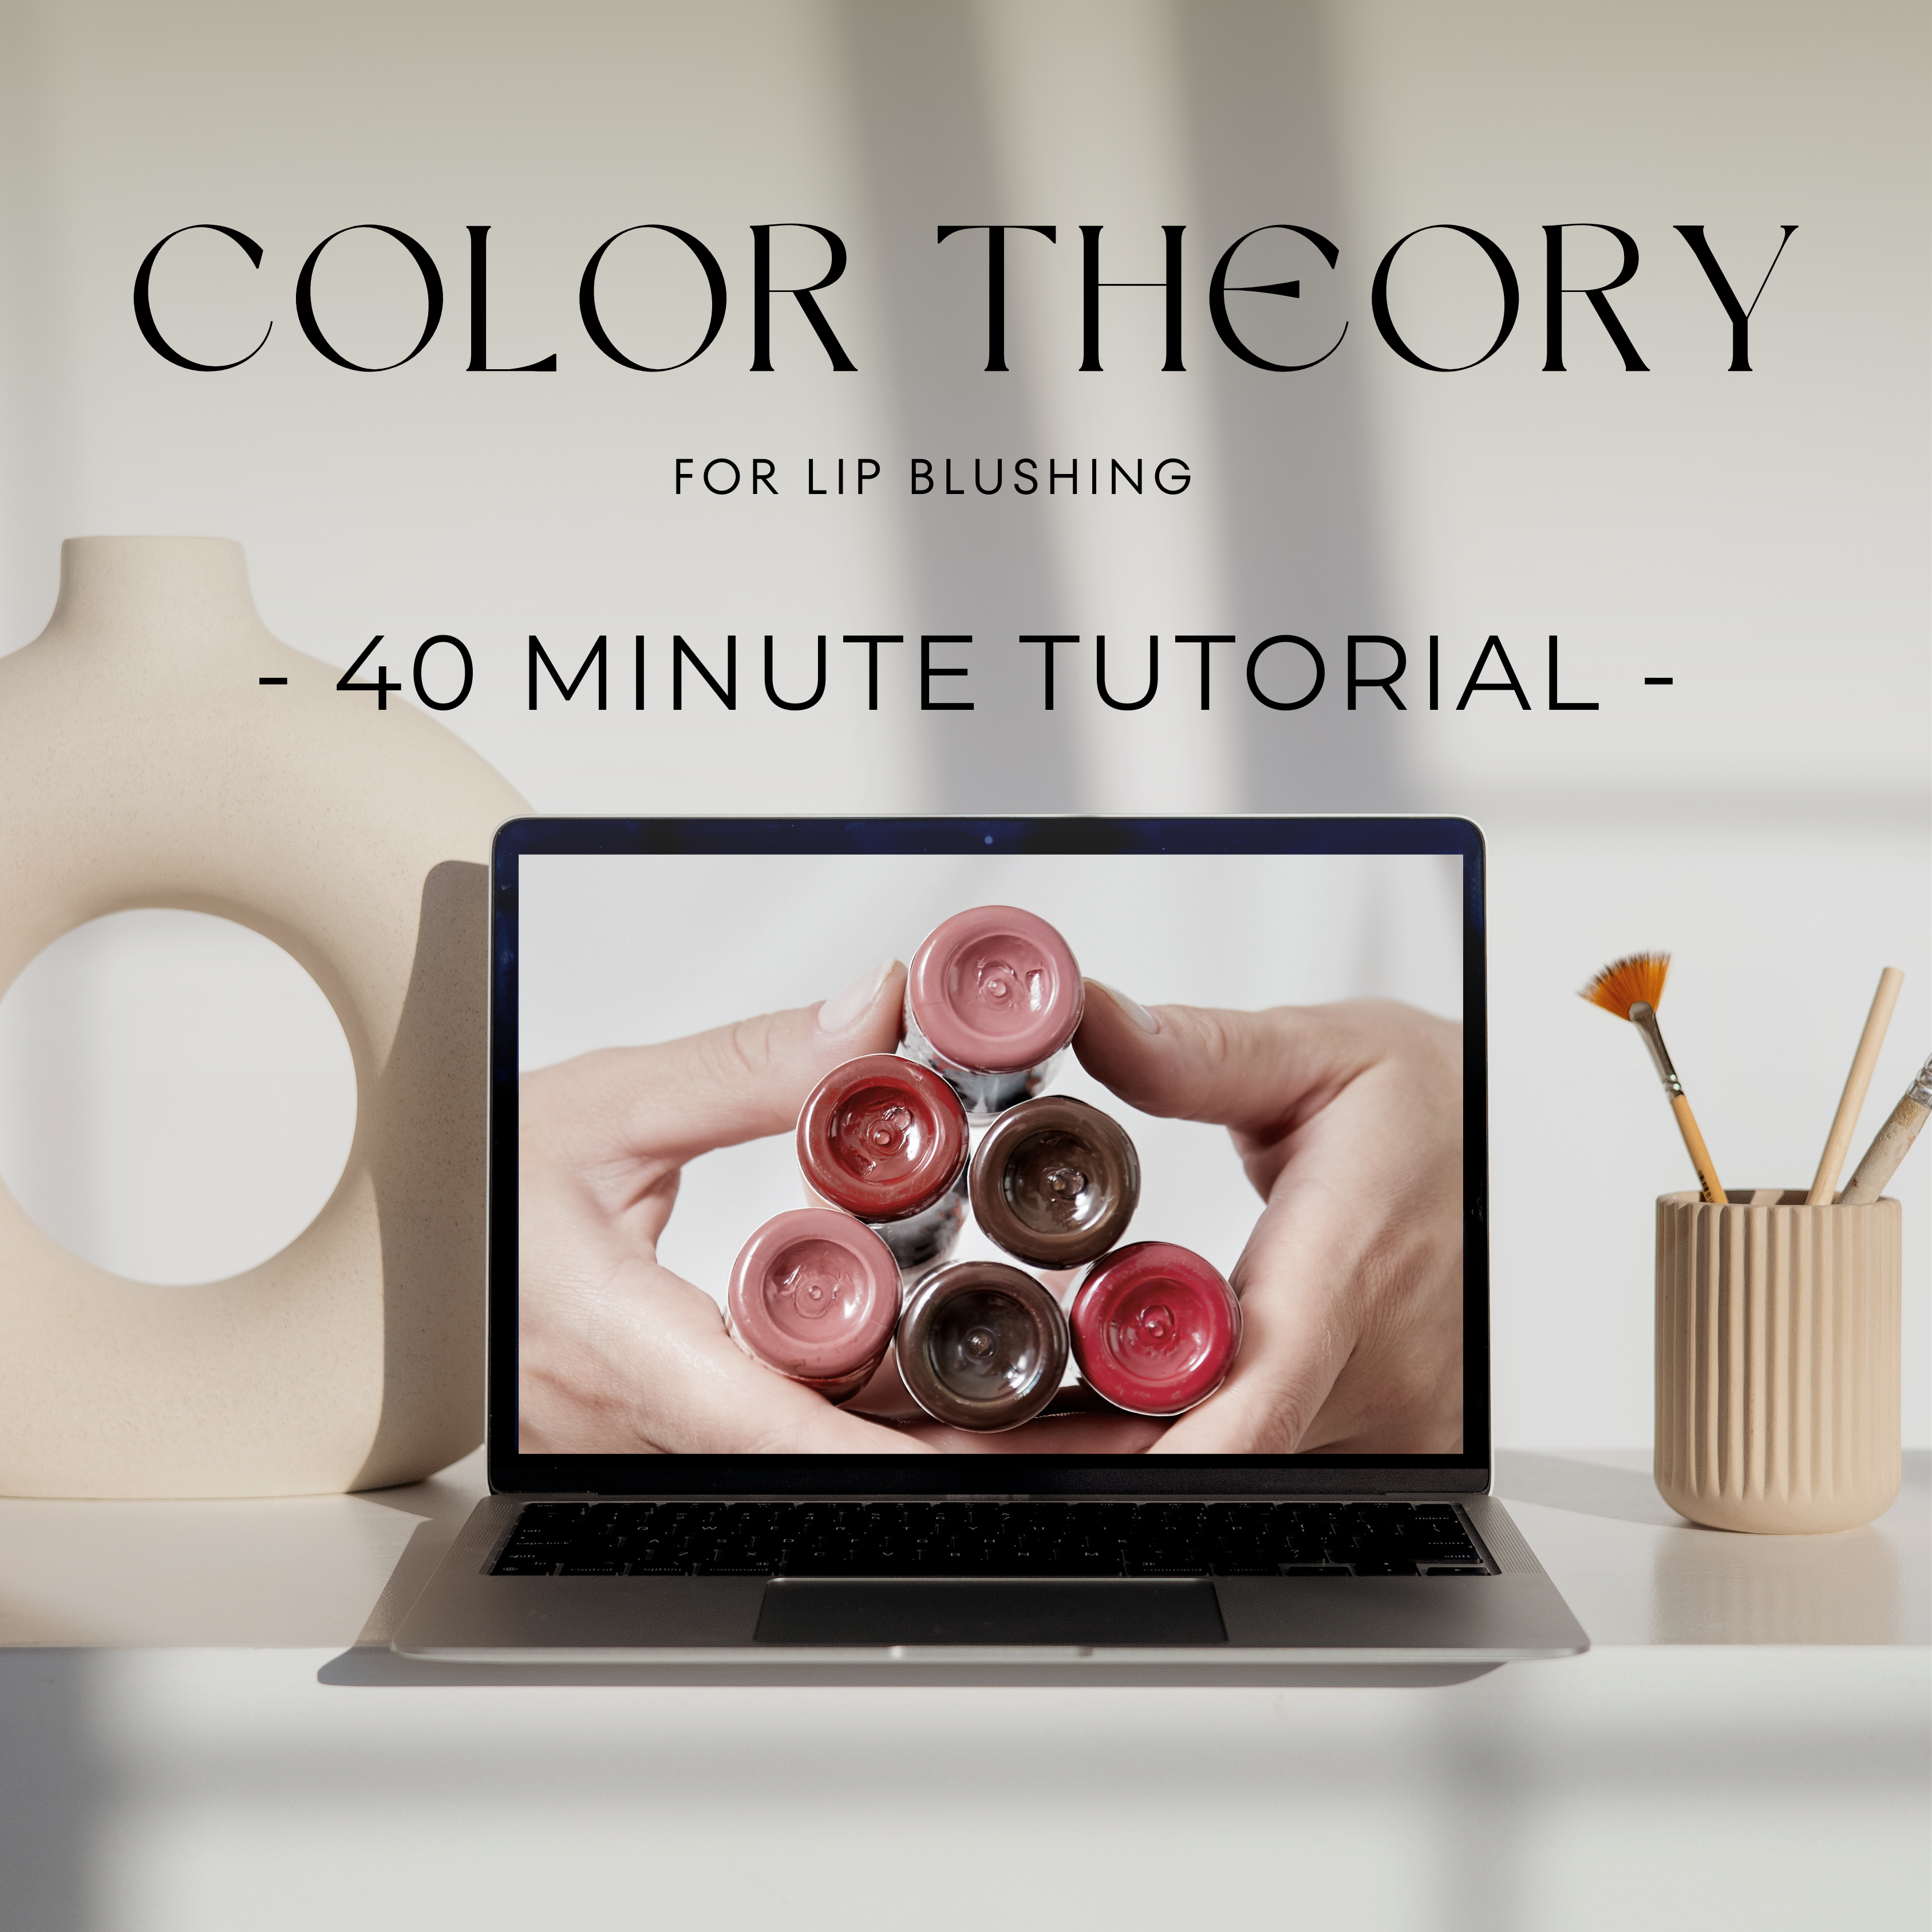 Master Color Theory for Lip Blush